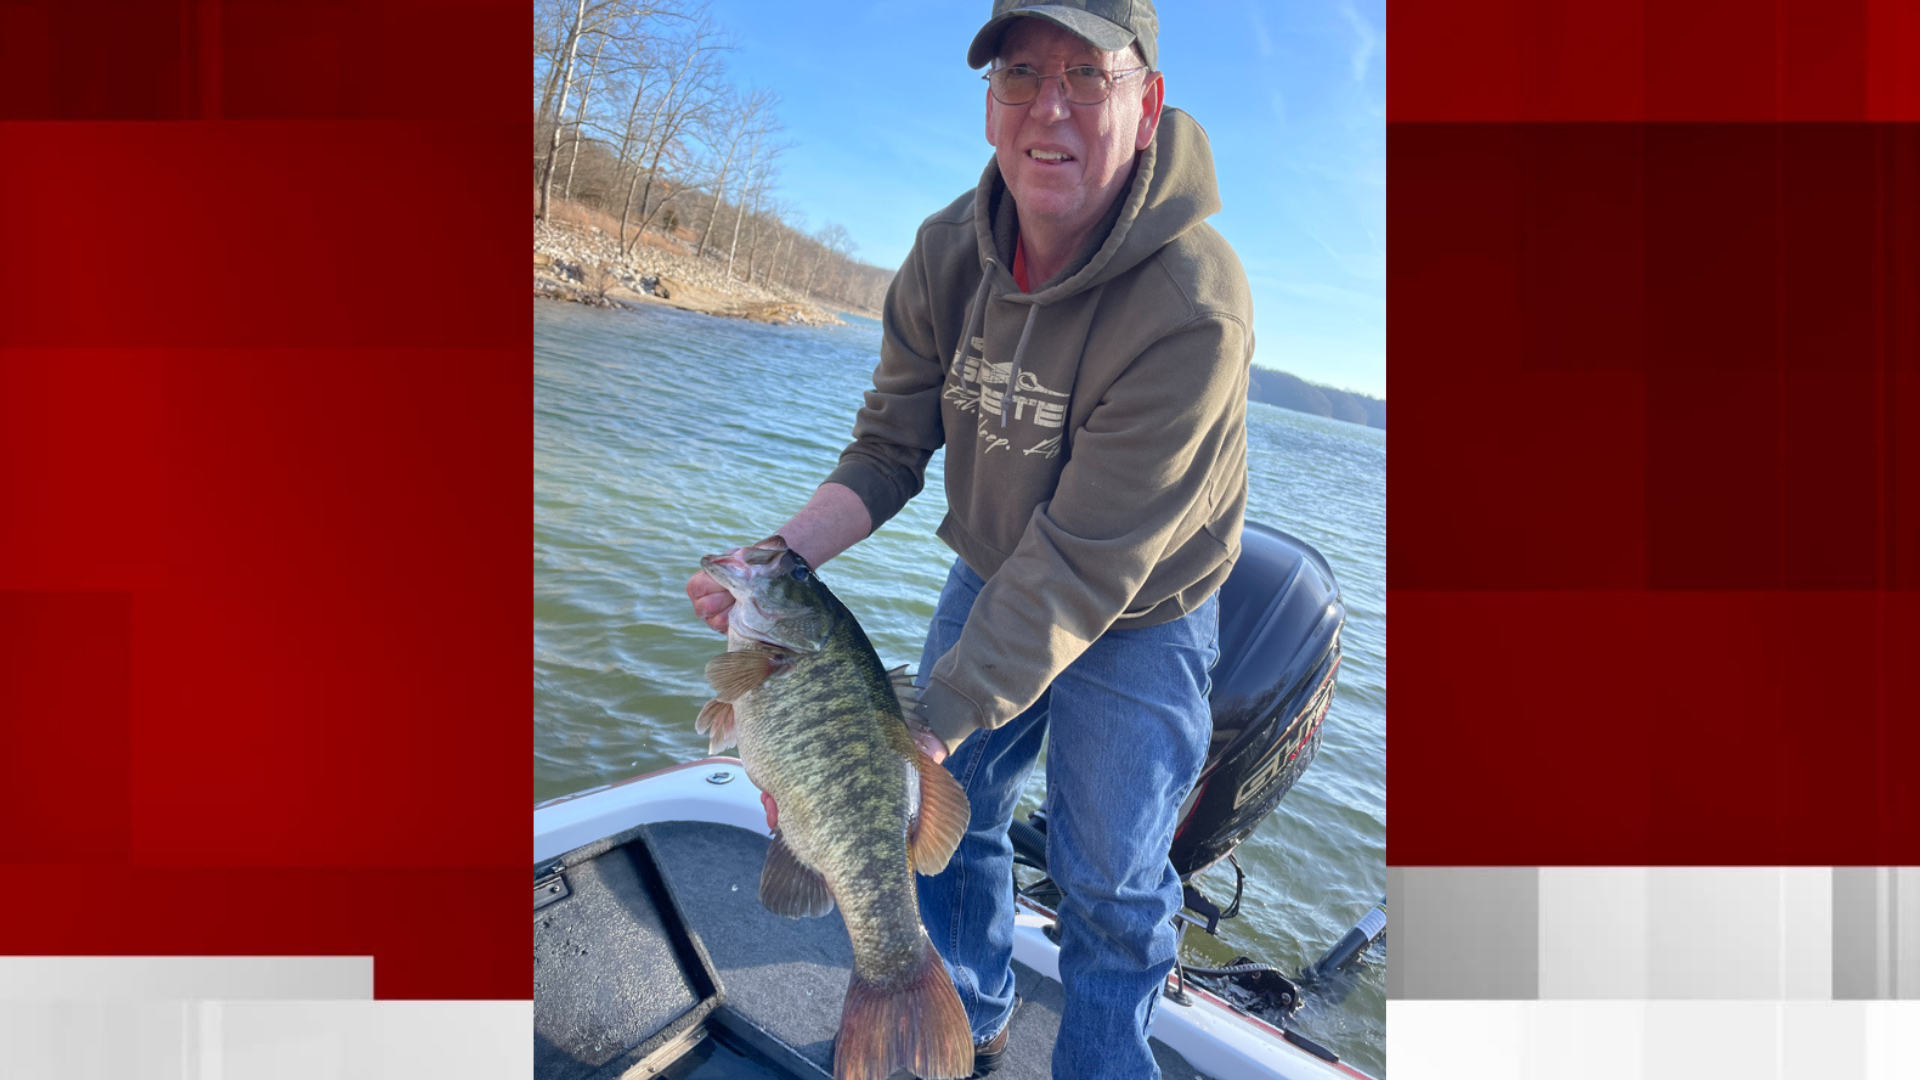 Hoosier angler catches state record smallmouth bass on Monroe Lake